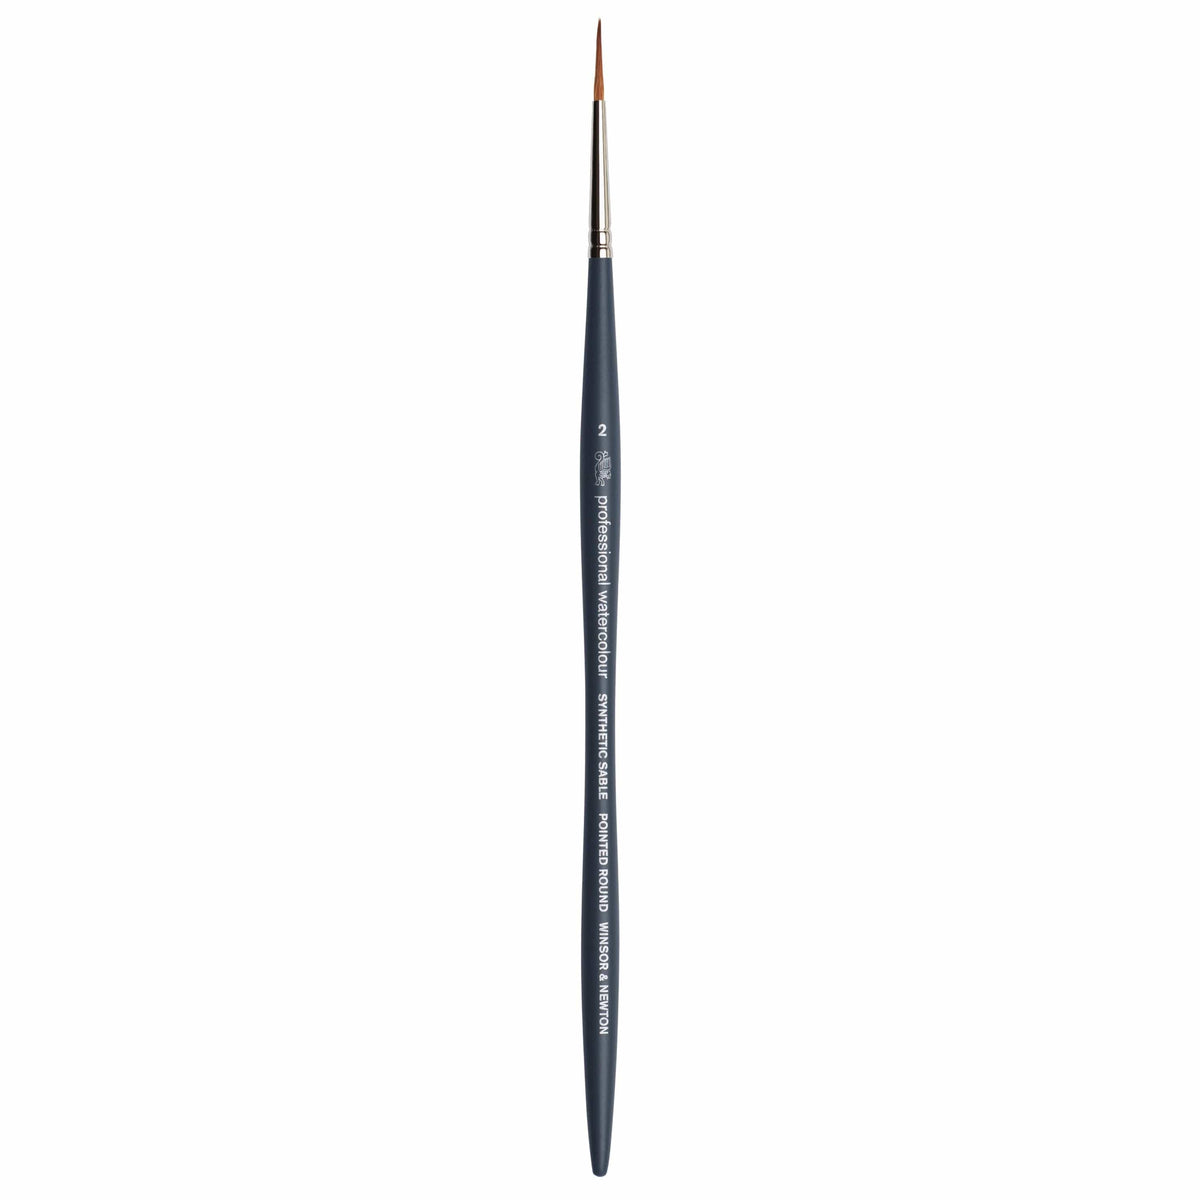 Winsor & Newton Professional Watercolor Synthetic Sable Brush